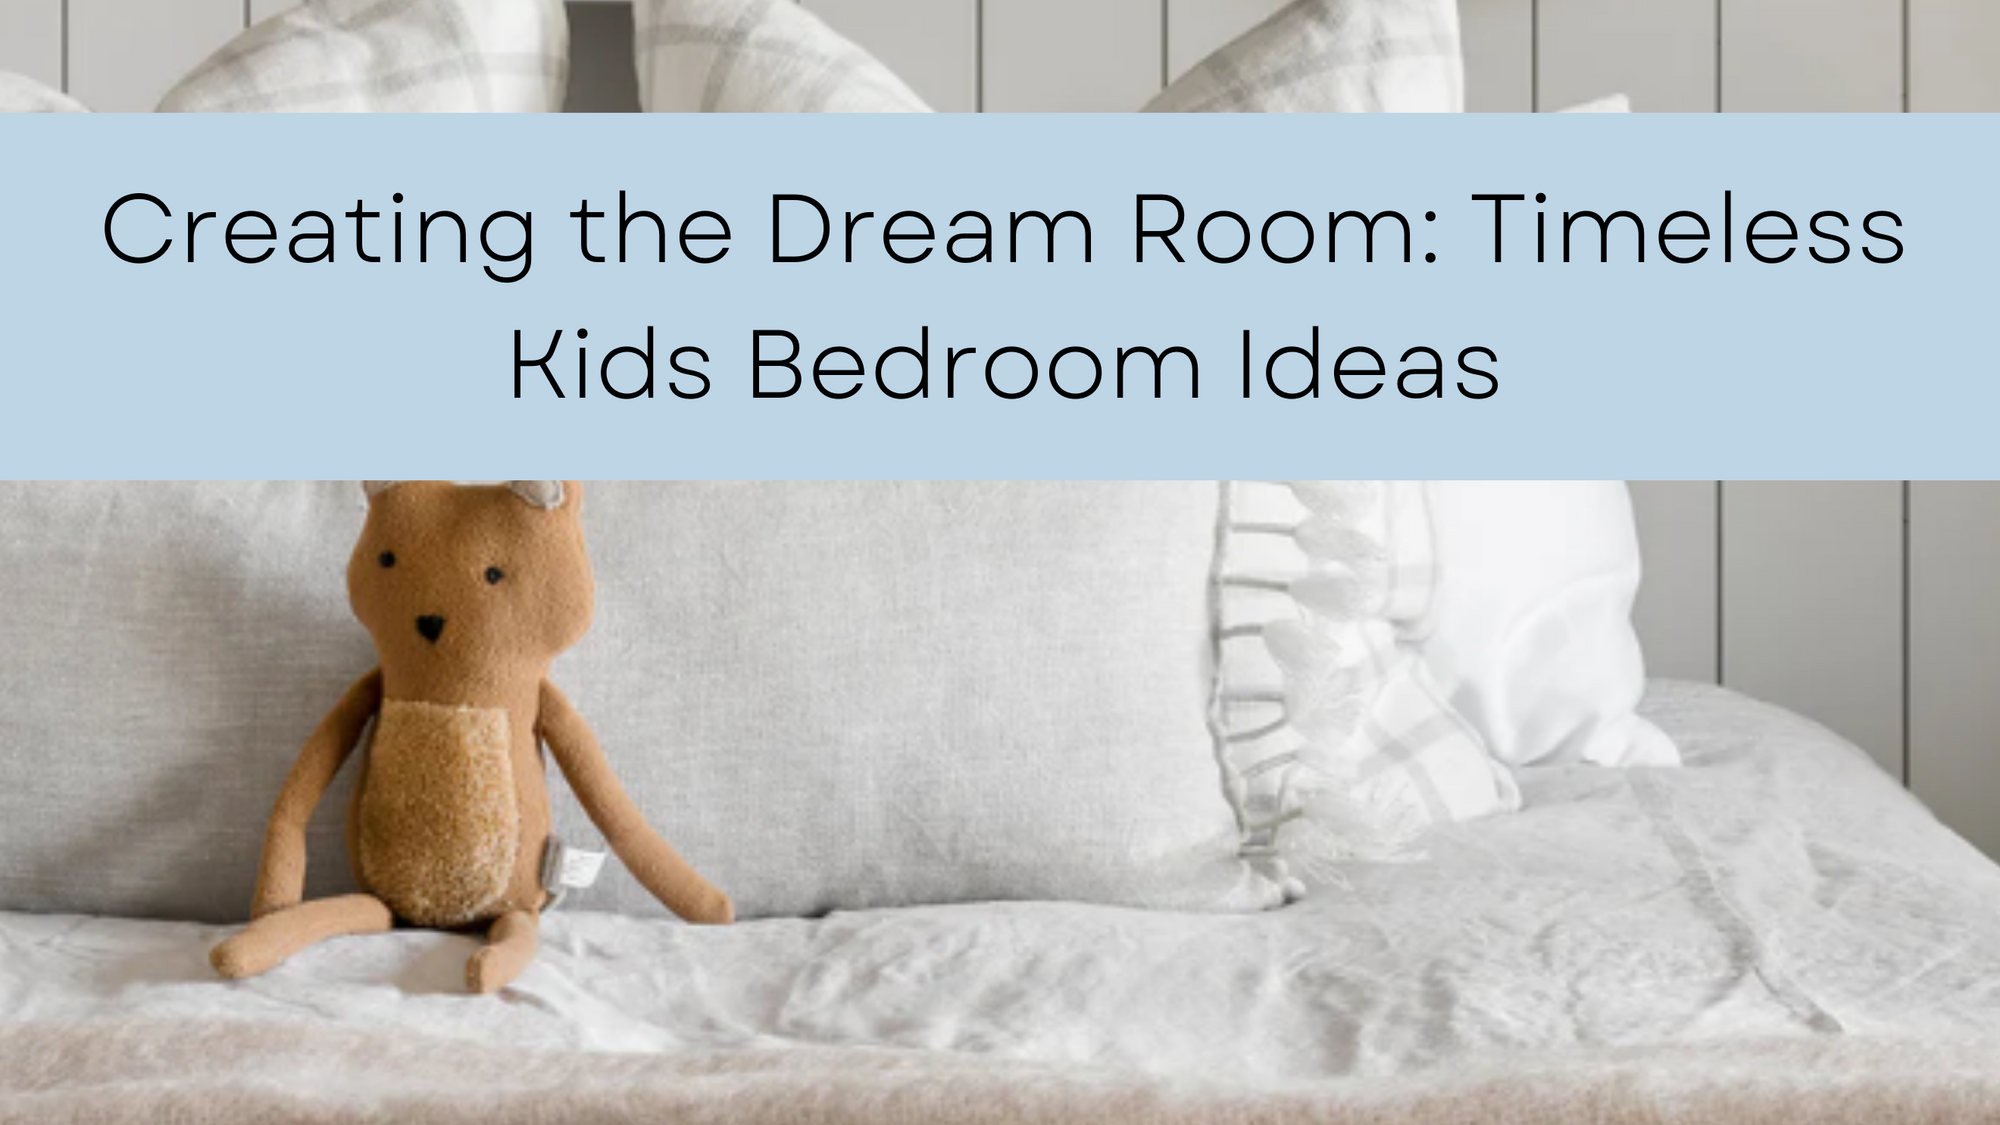 Creating the Dream Room: Timeless Kids Bedroom Ideas